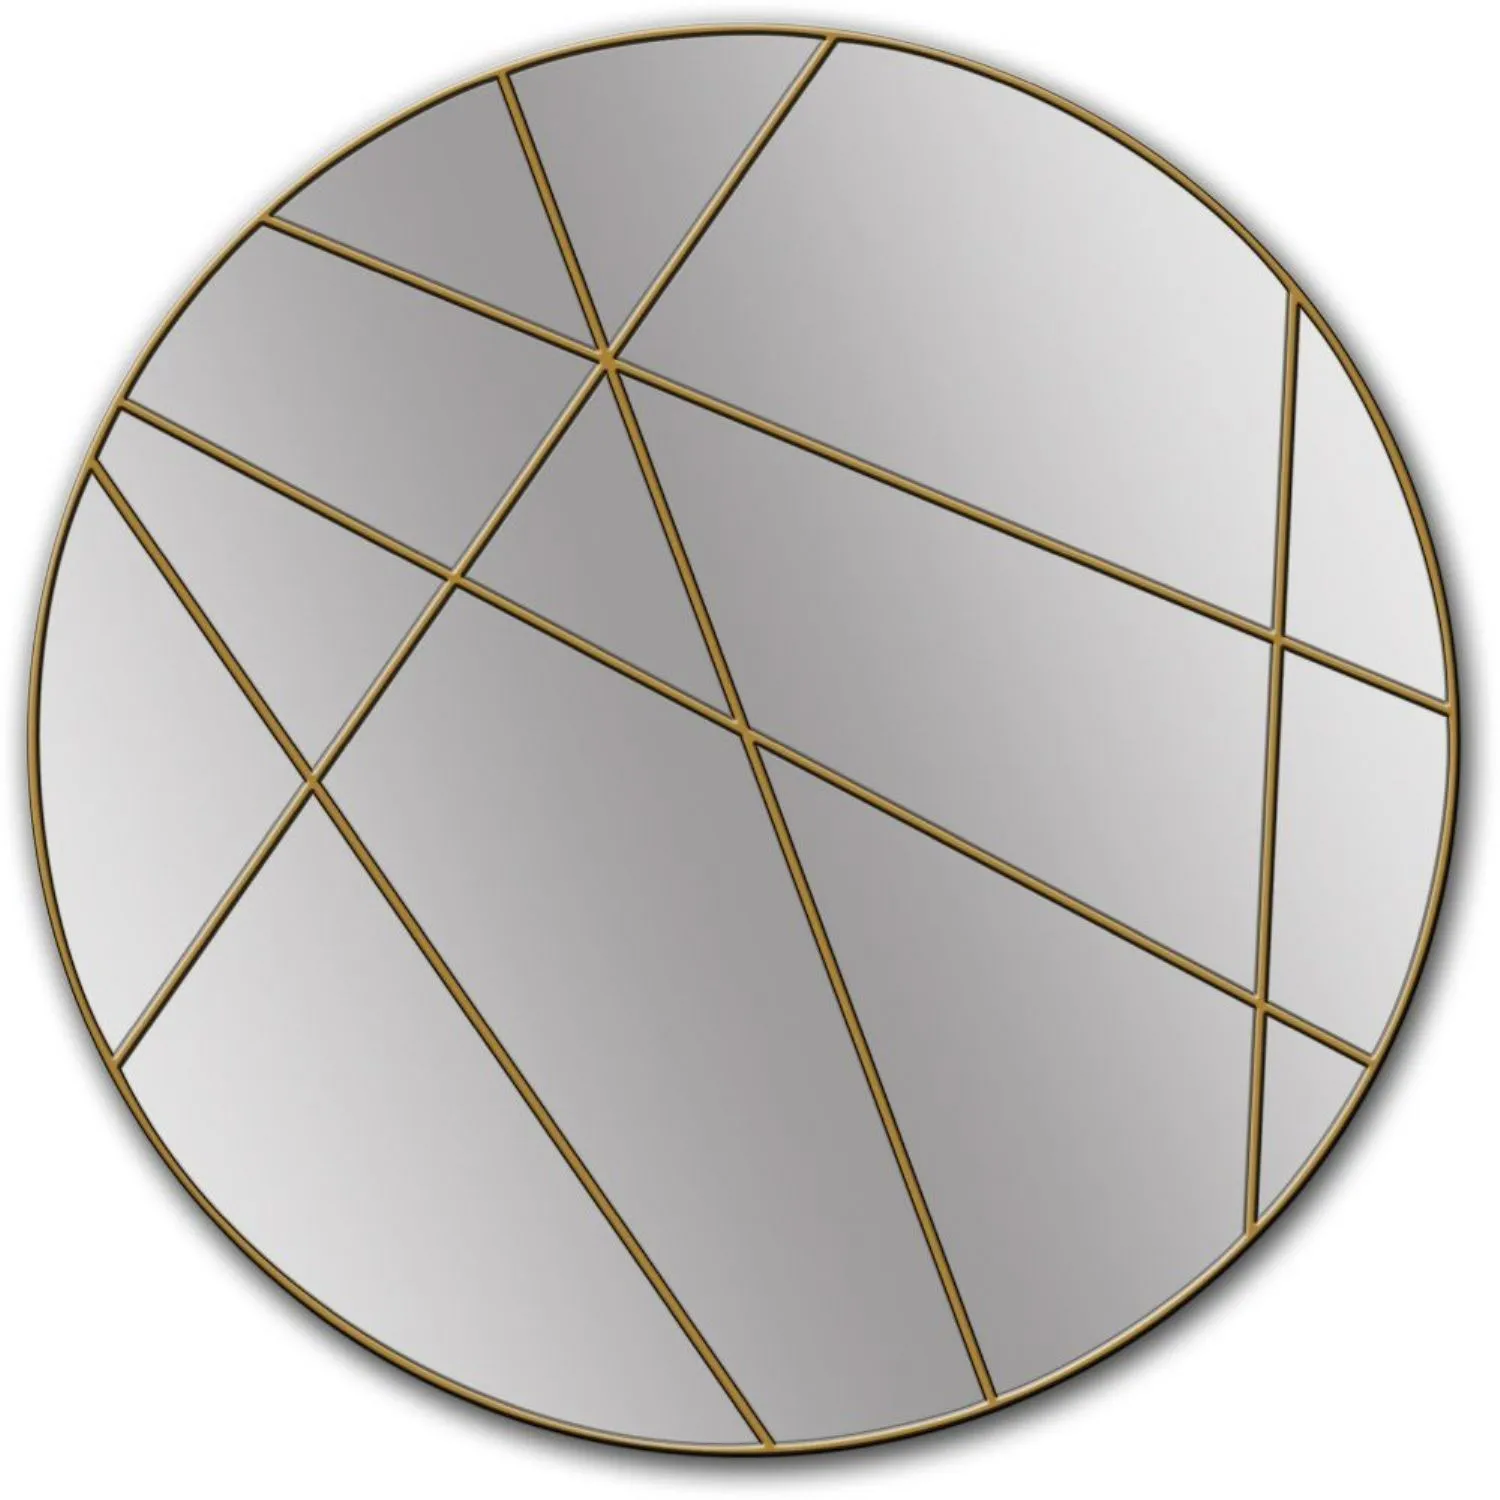 Mirror Collection Gold Iron Framed Mirror